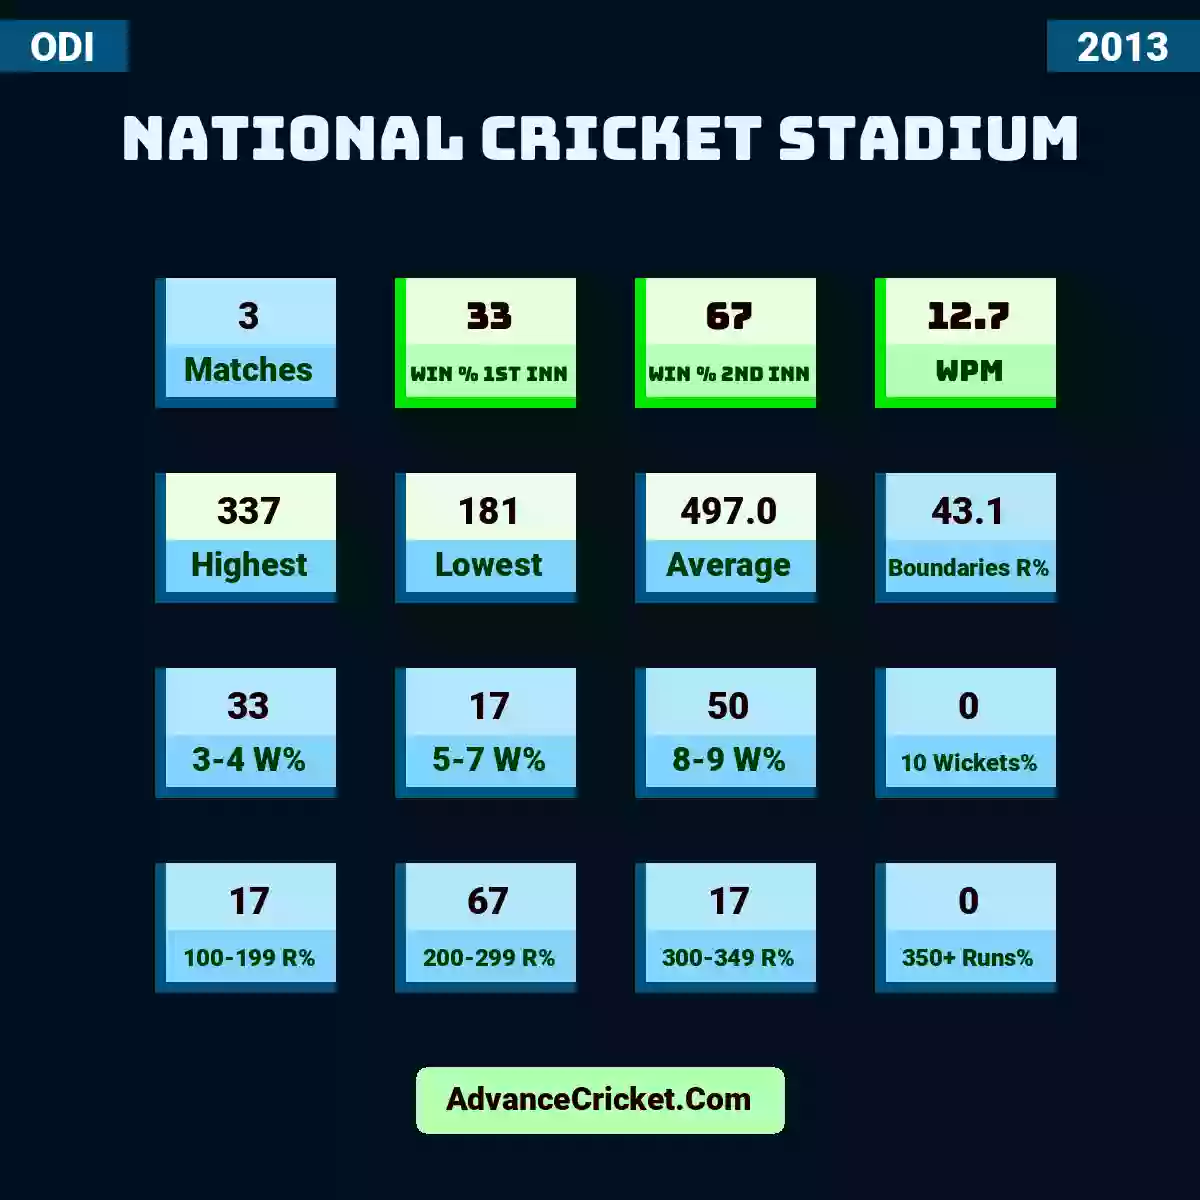 Image showing National Cricket Stadium with Matches: 3, Win % 1st Inn: 33, Win % 2nd Inn: 67, WPM: 12.7, Highest: 337, Lowest: 181, Average: 497.0, Boundaries R%: 43.1, 3-4 W%: 33, 5-7 W%: 17, 8-9 W%: 50, 10 Wickets%: 0, 100-199 R%: 17, 200-299 R%: 67, 300-349 R%: 17, 350+ Runs%: 0.